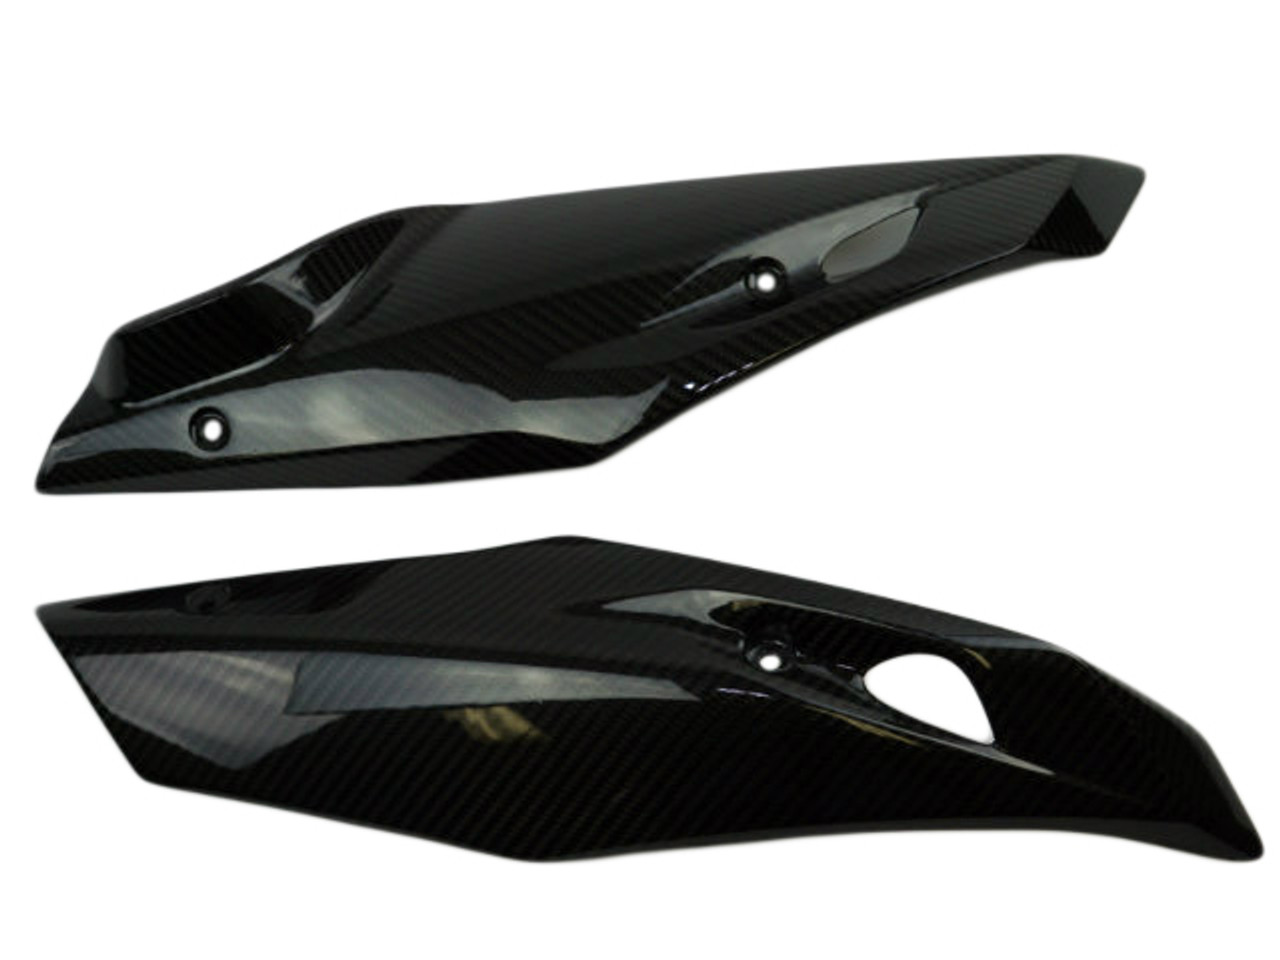 Belly Fairings in Glossy Twill Weave Carbon Fiber for BMW R1200R, RS 2015+